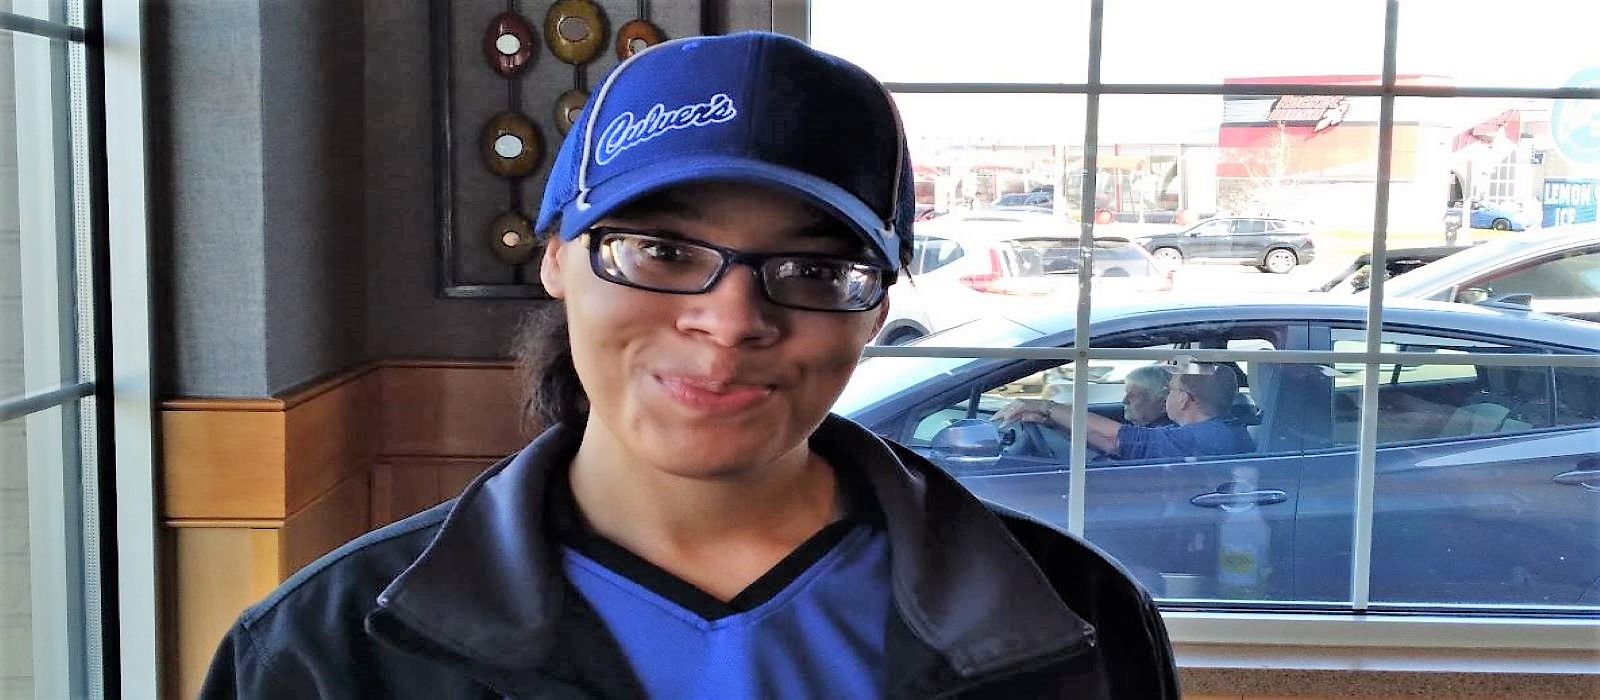 An LCS participant working at Culver's